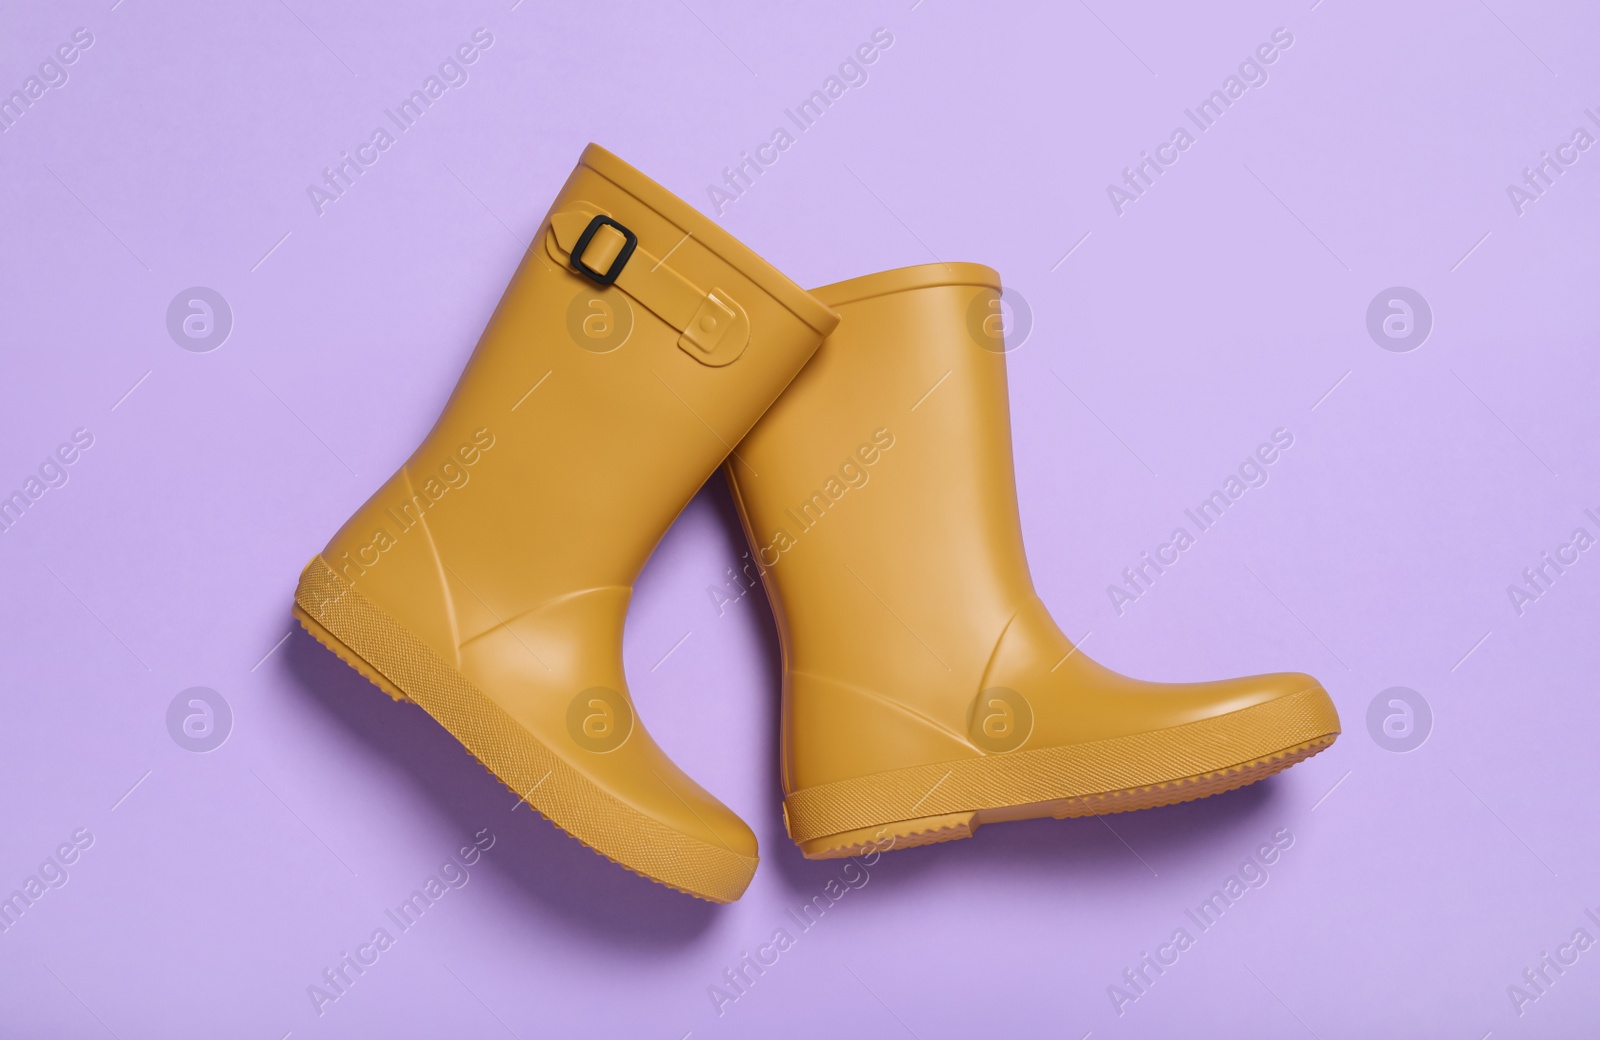 Photo of Pair of yellow rubber boots on violet background, top view